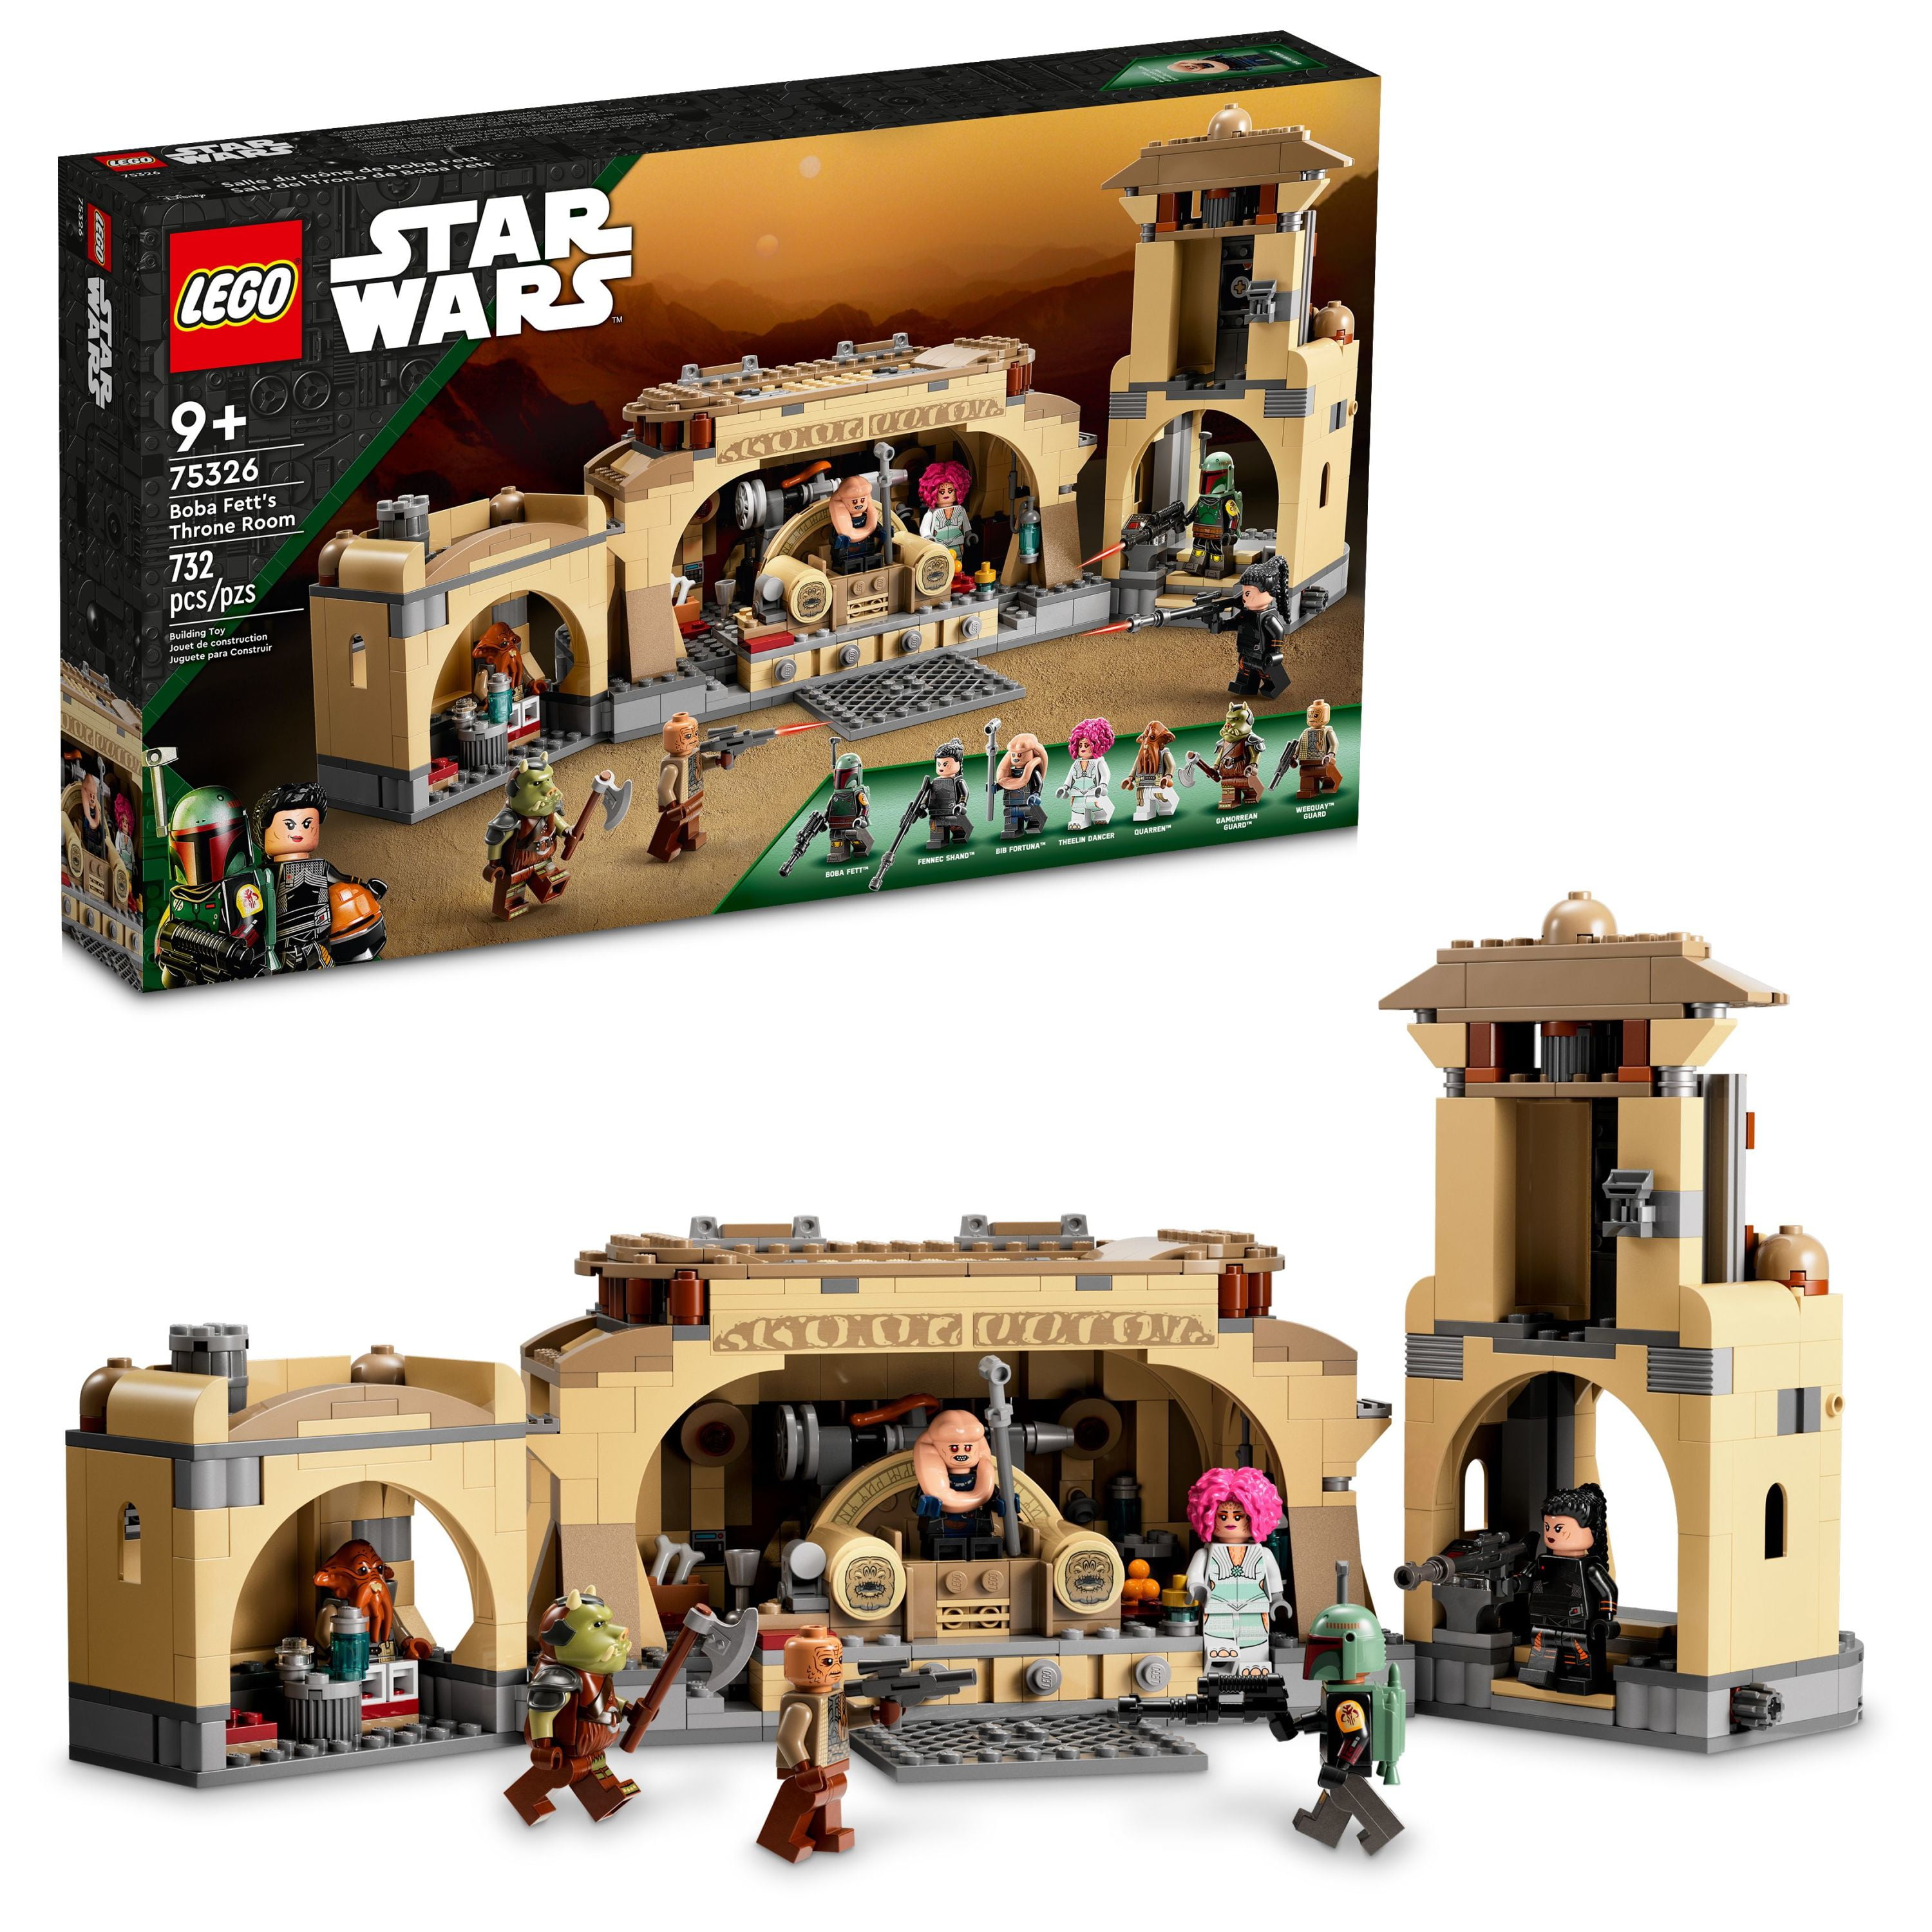 LEGO Star Wars Boba Fett's Room Kit 75326, with Jabba The Hutt and 7 Minifigures, Star Wars Building Set, Great Gift For Star Wars Fans, Boys, Girls, Age